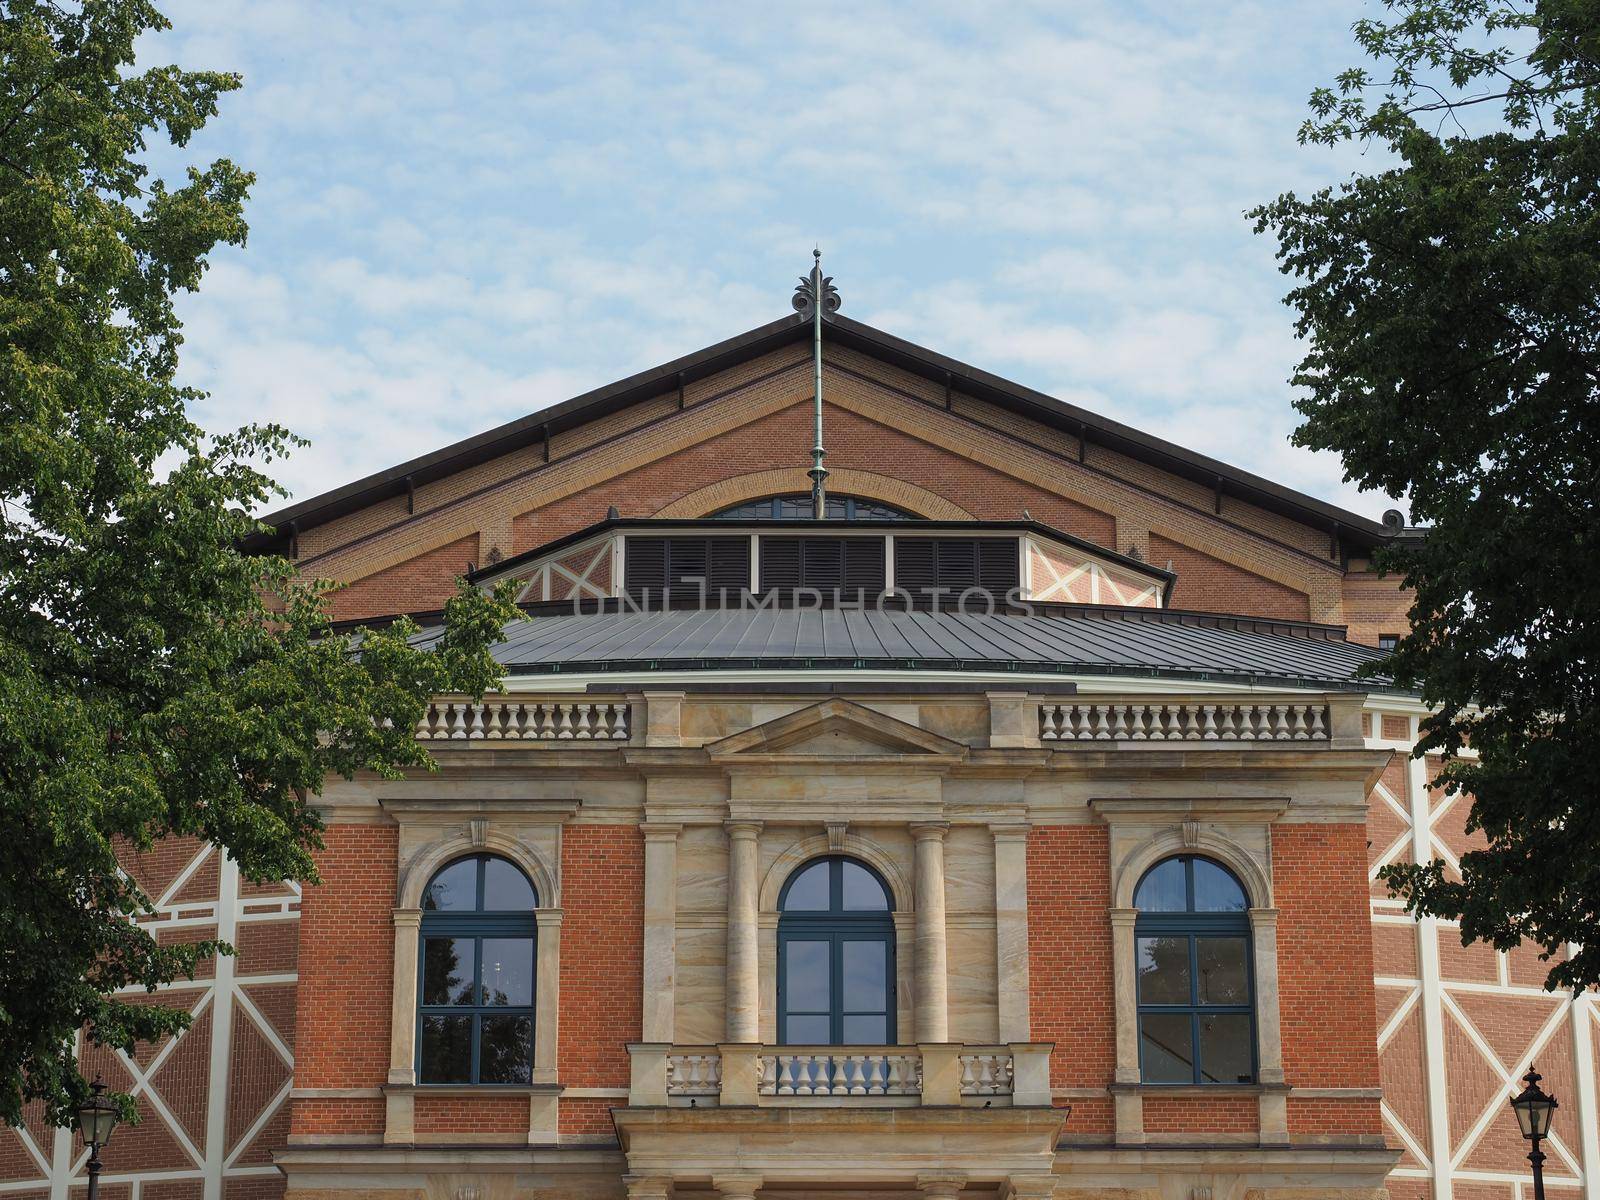 Wagner Festspielhaus translation Festival Theatre in Bayreuth, Germany